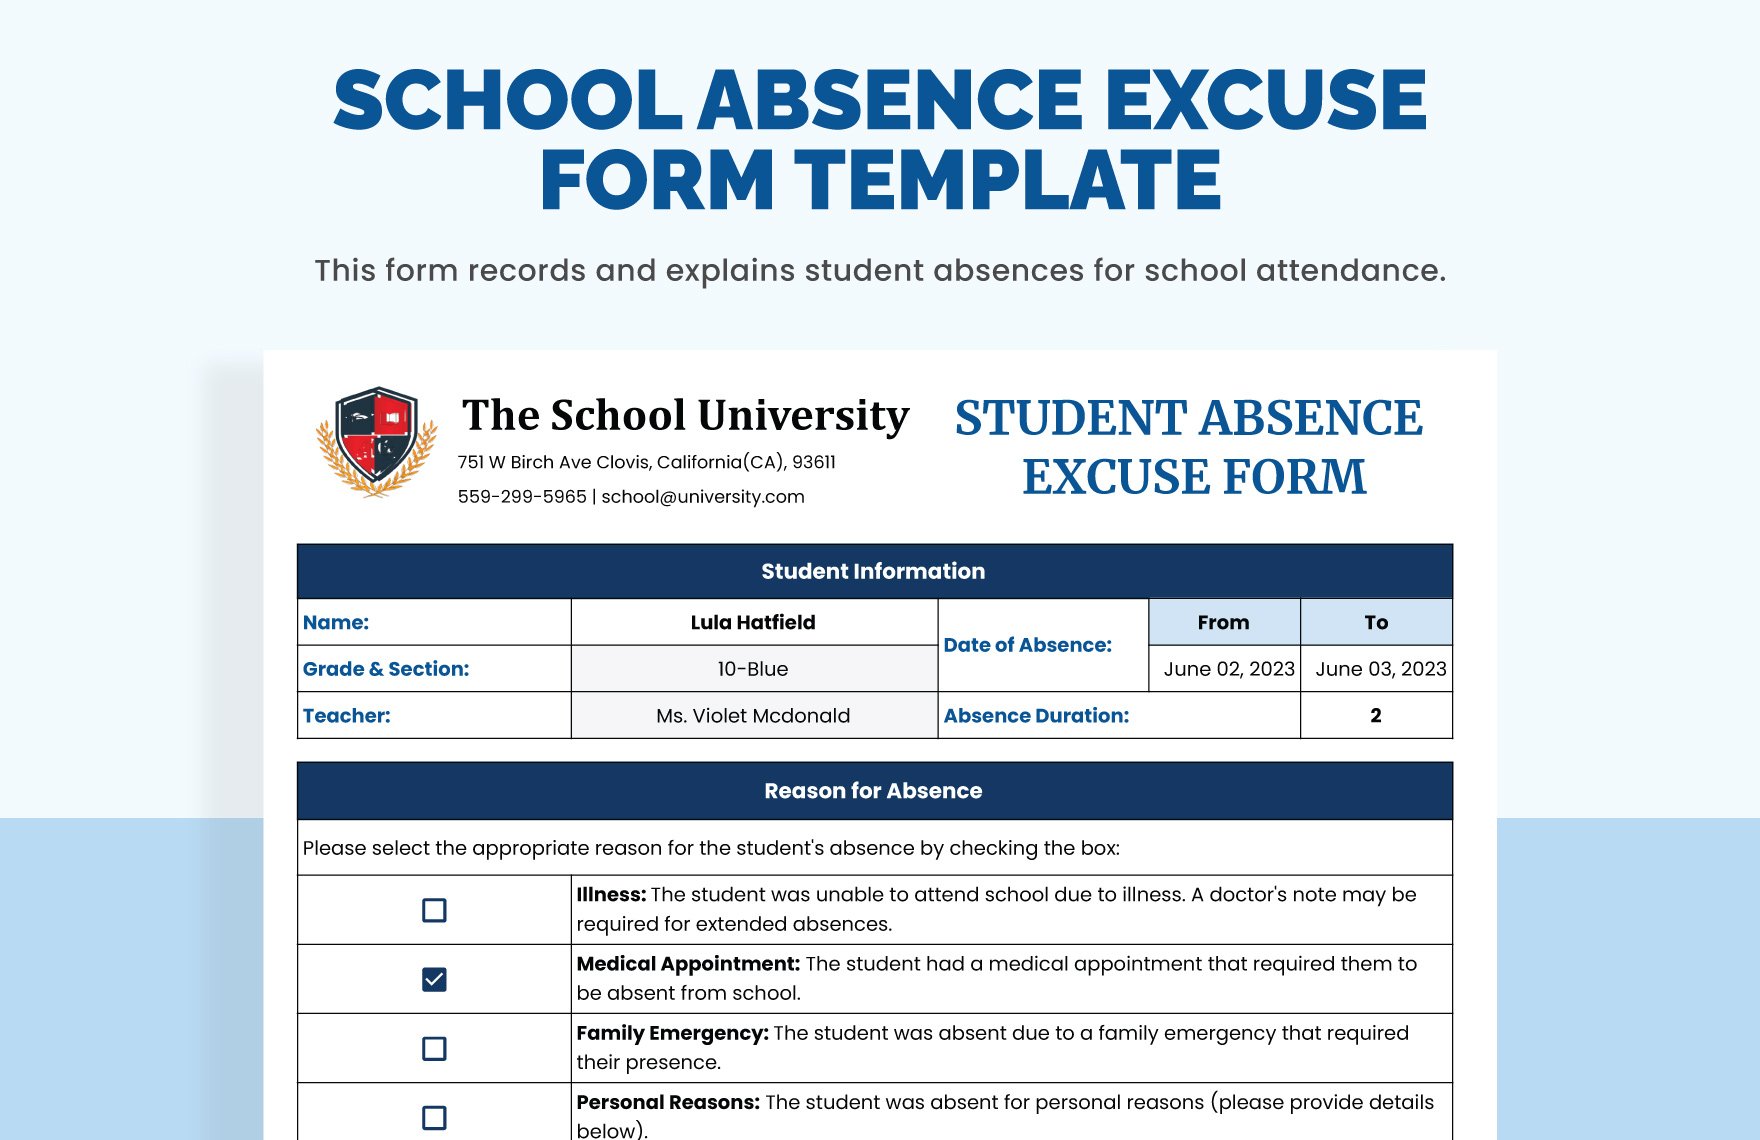 School Absence Excuse Form Template